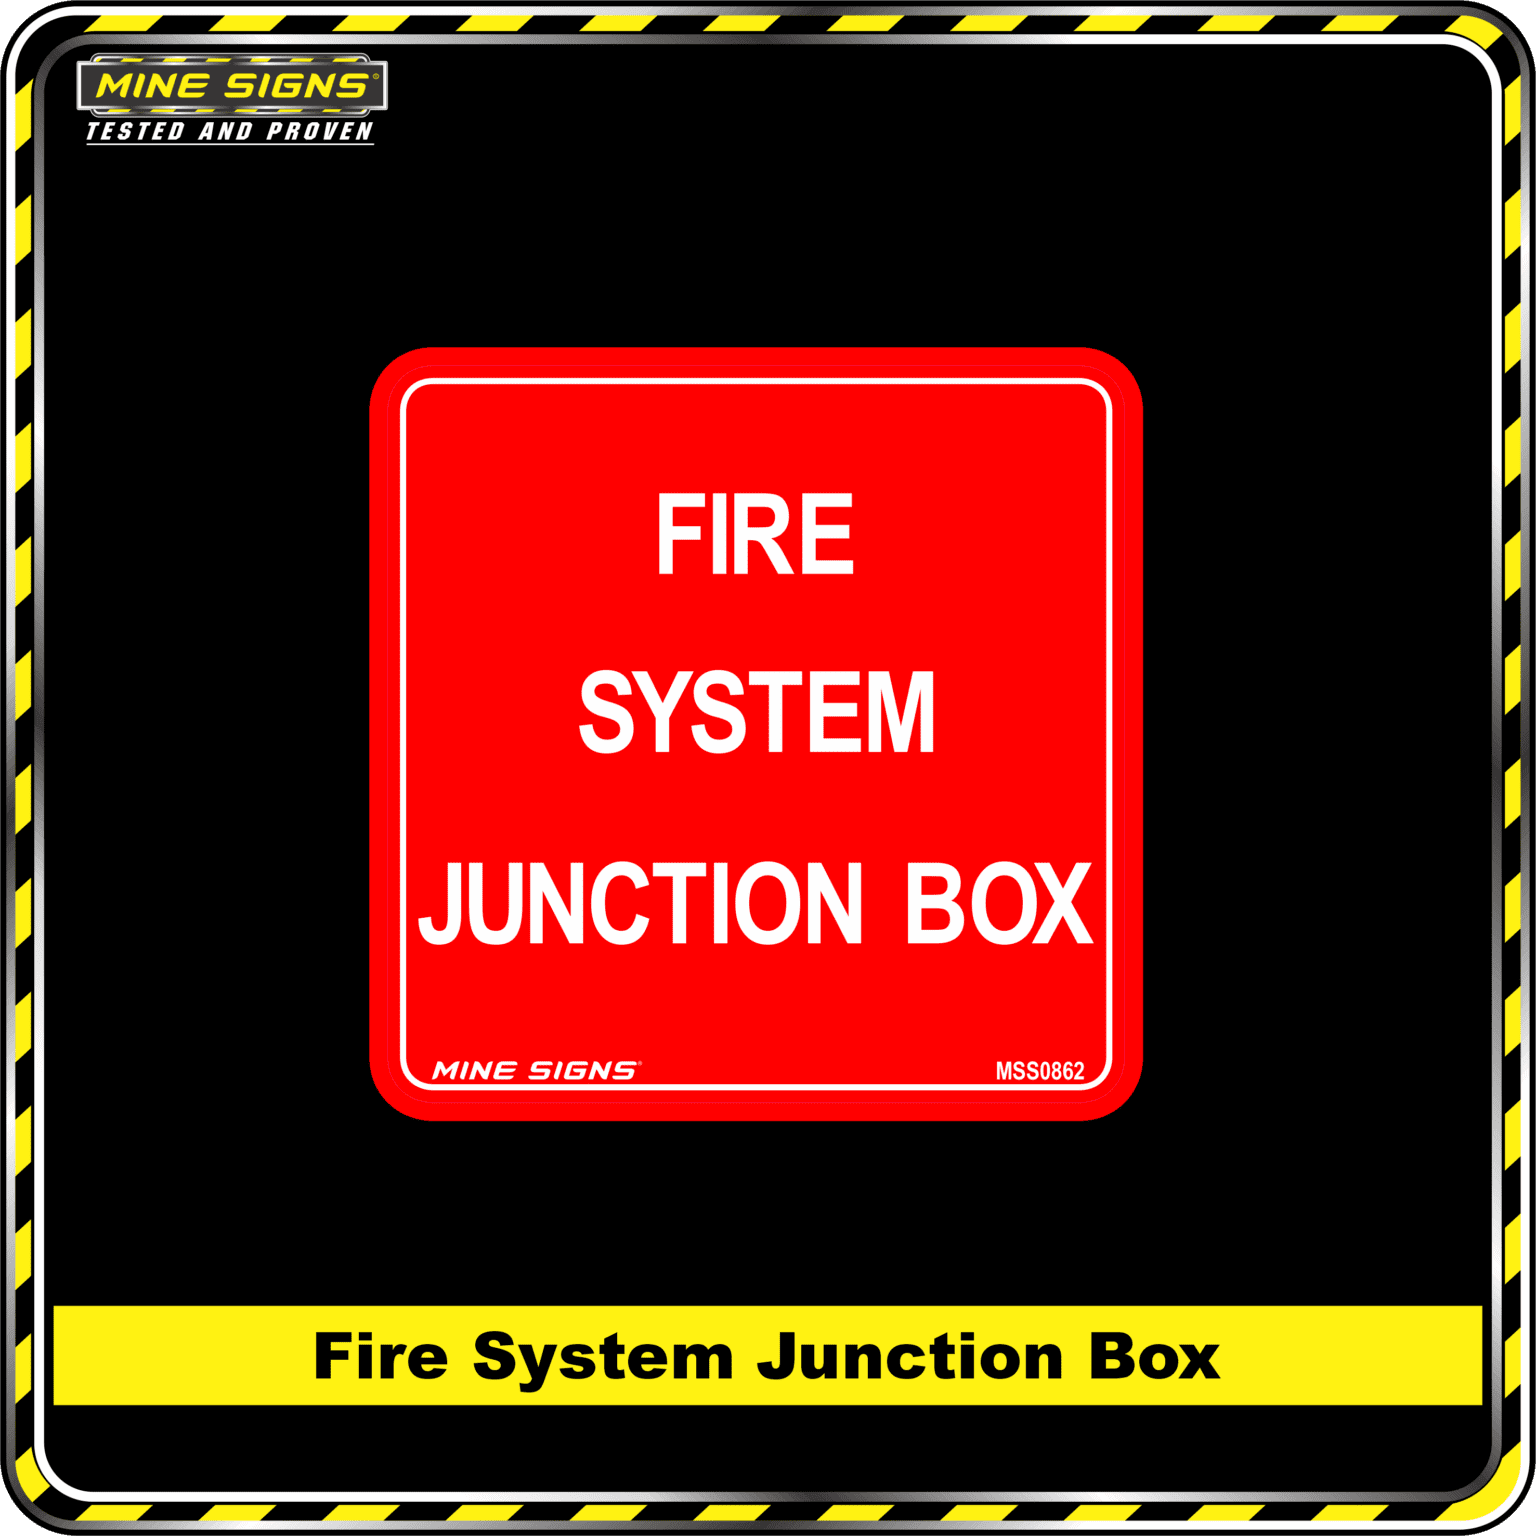 fire-system-junction-box-info-label-0862-120-x-120-mm